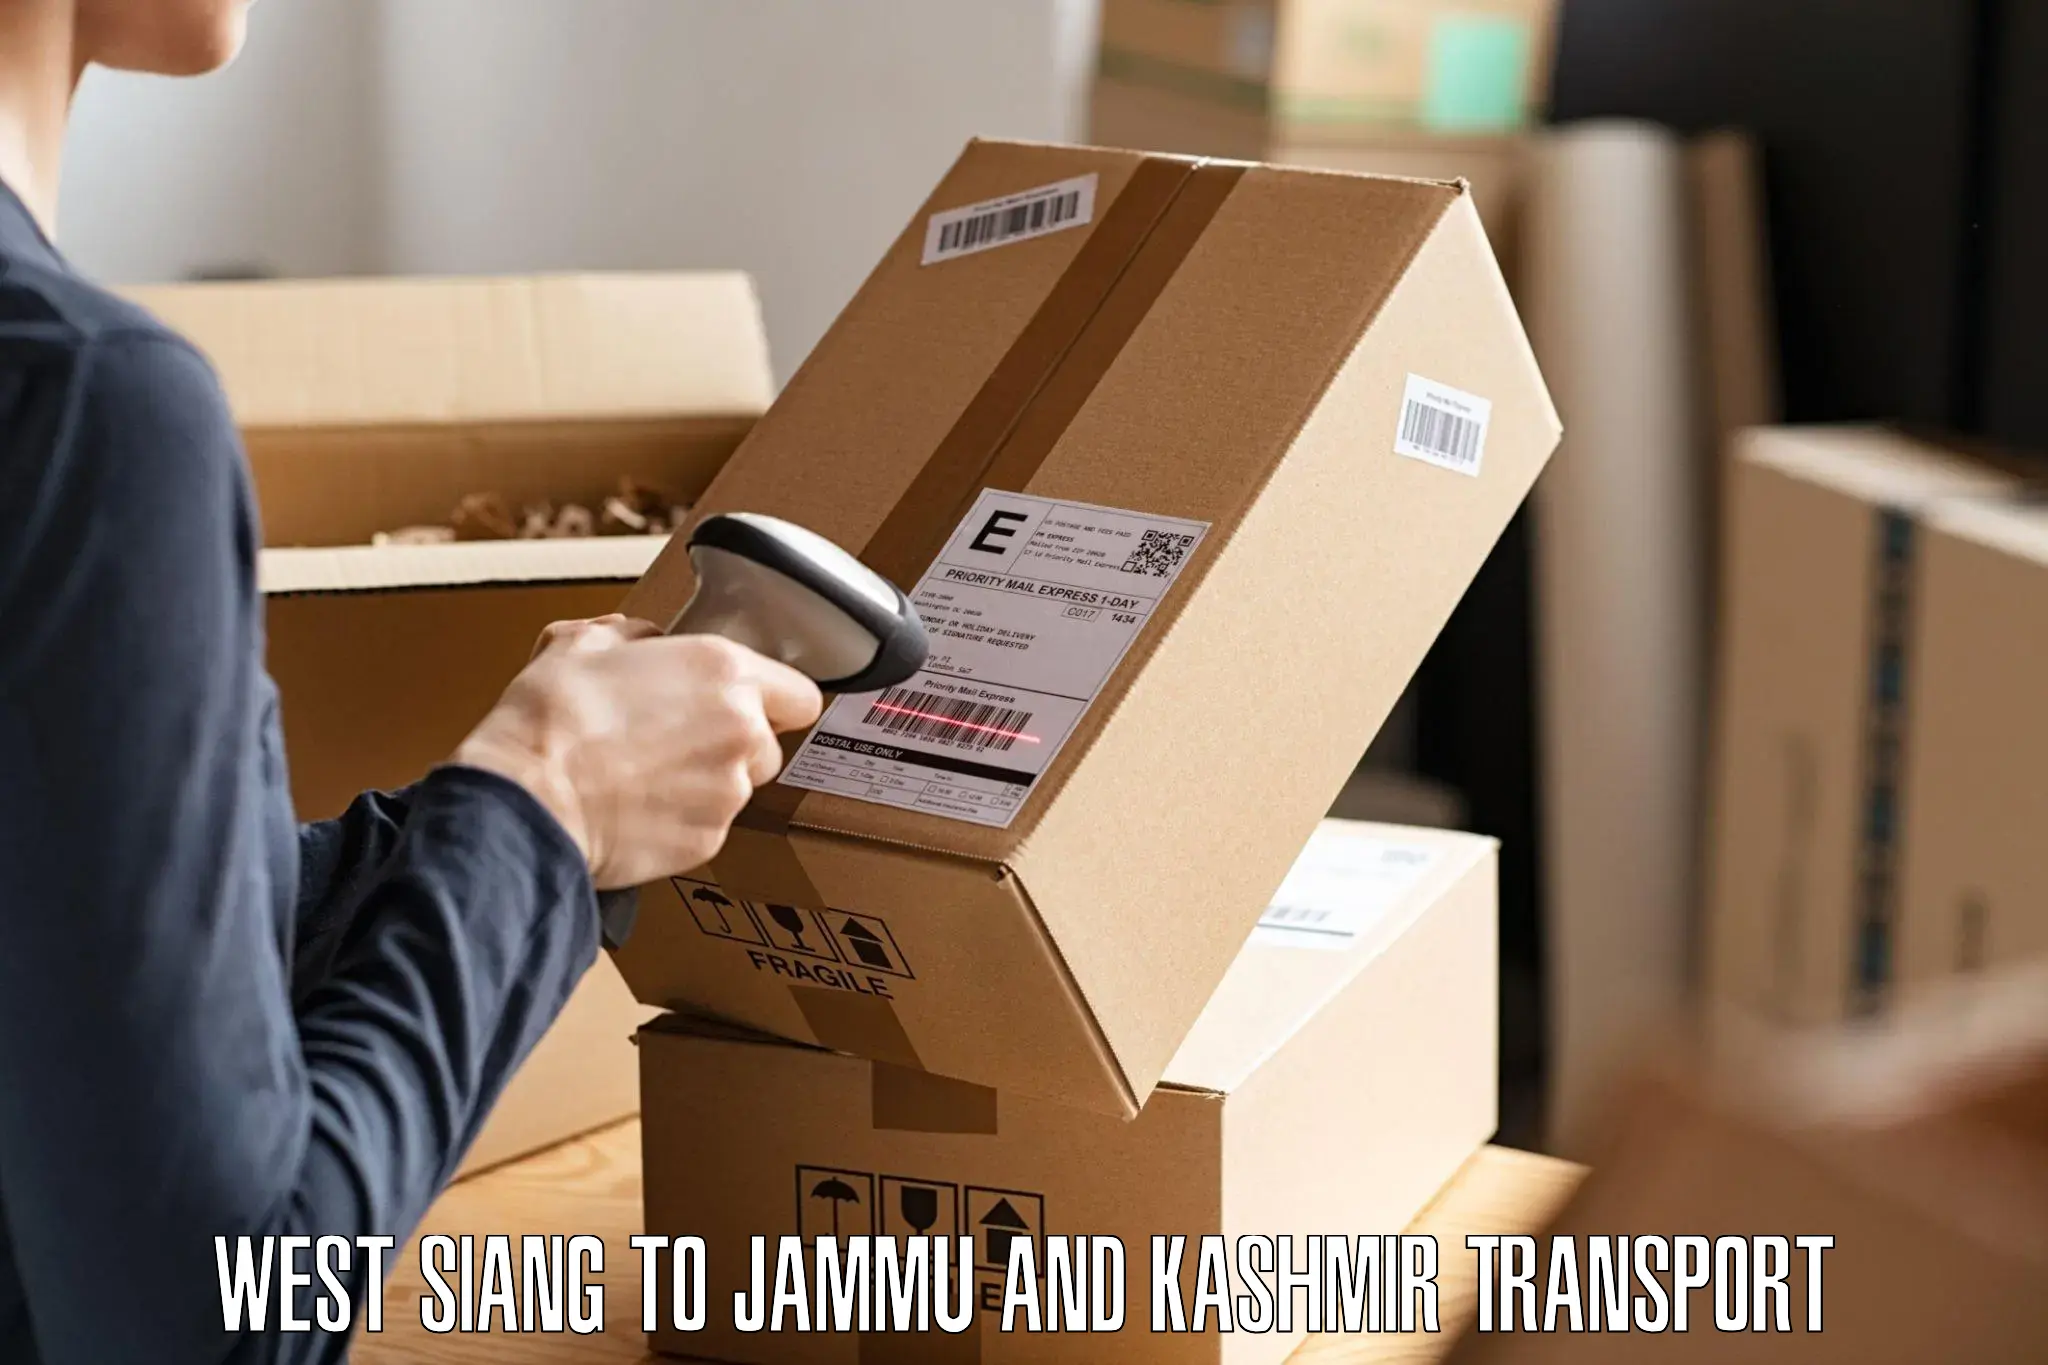 Cycle transportation service West Siang to Jammu and Kashmir